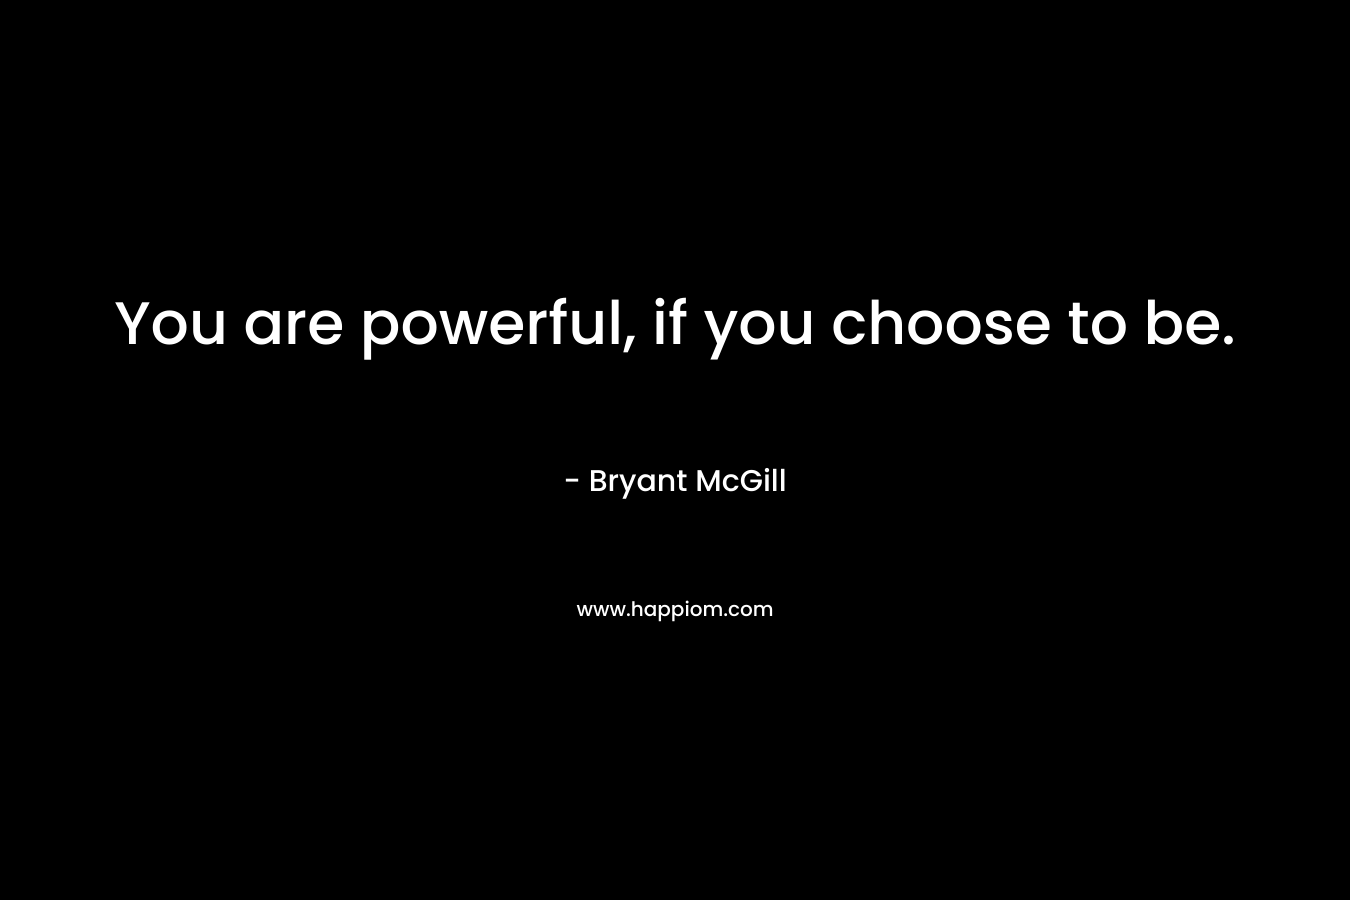 You are powerful, if you choose to be.